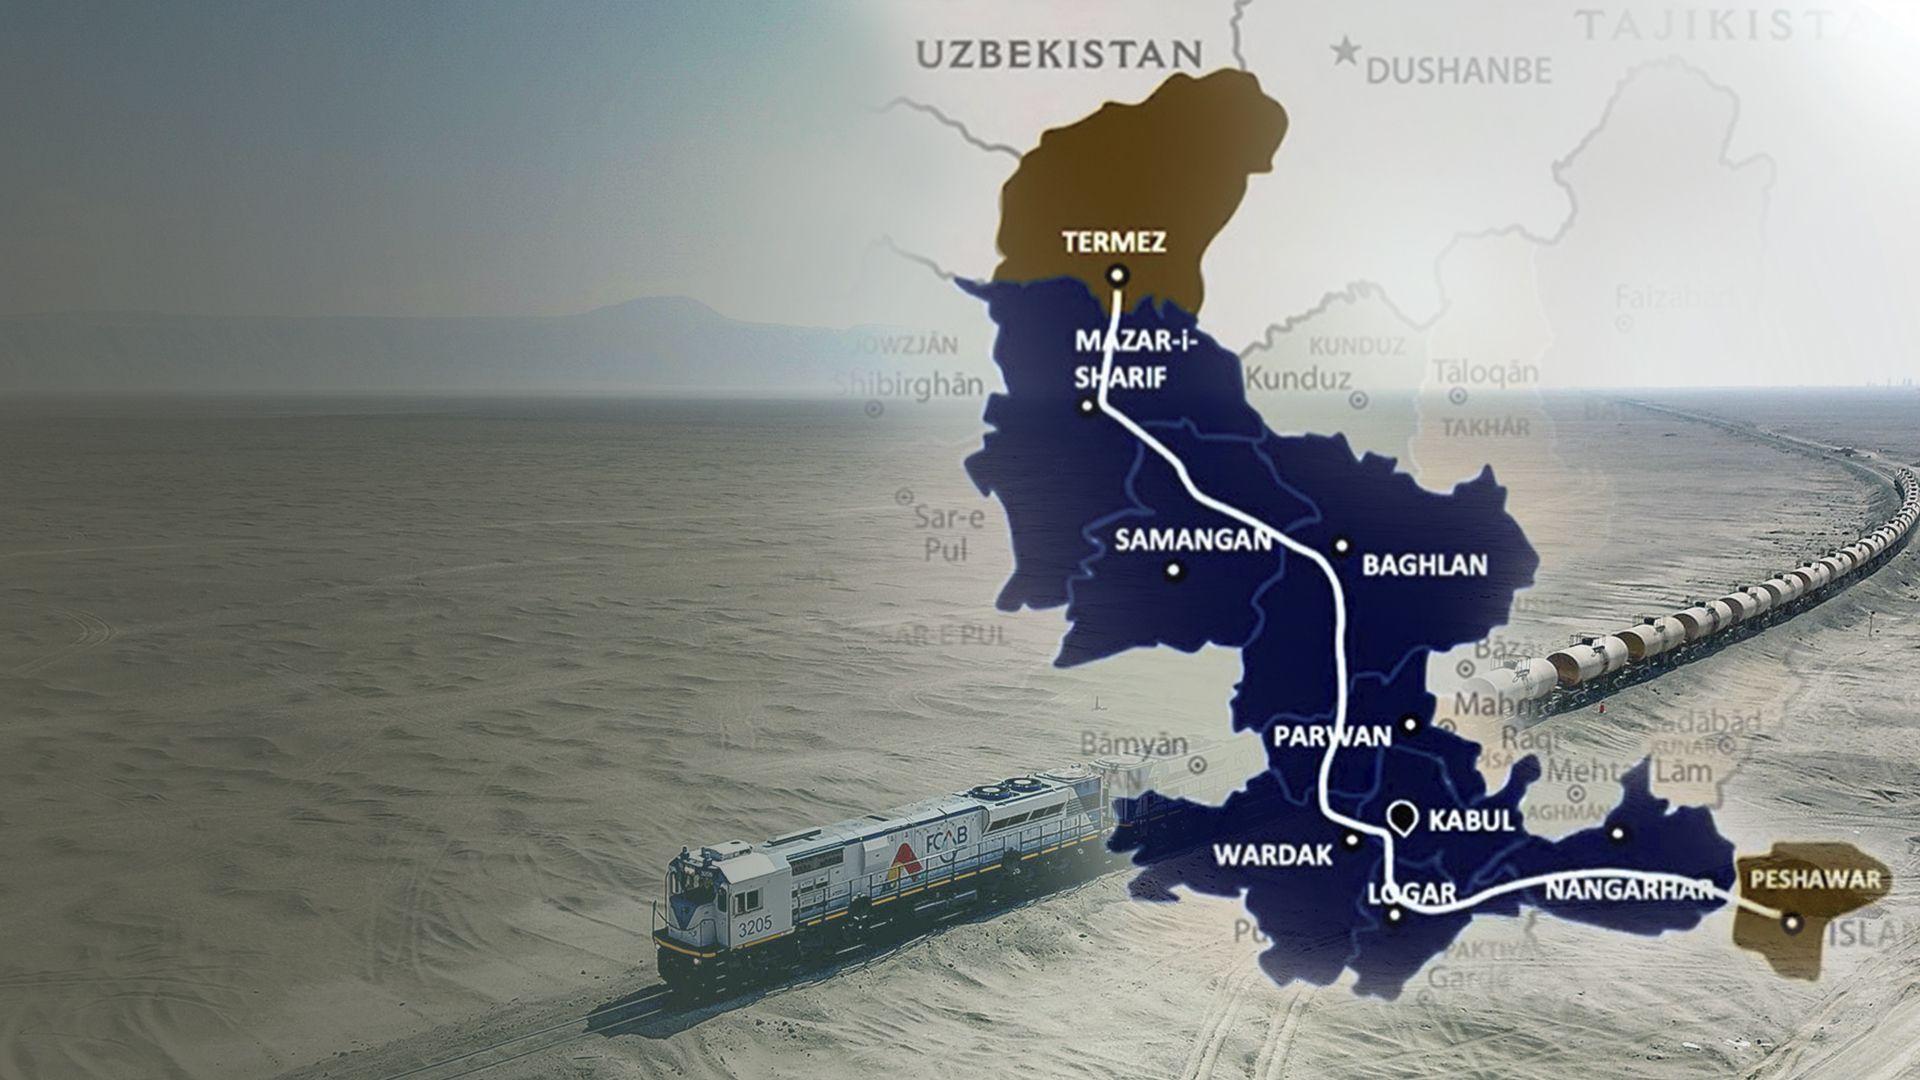 Trans-Afghan transport corridor may be launched by 2030